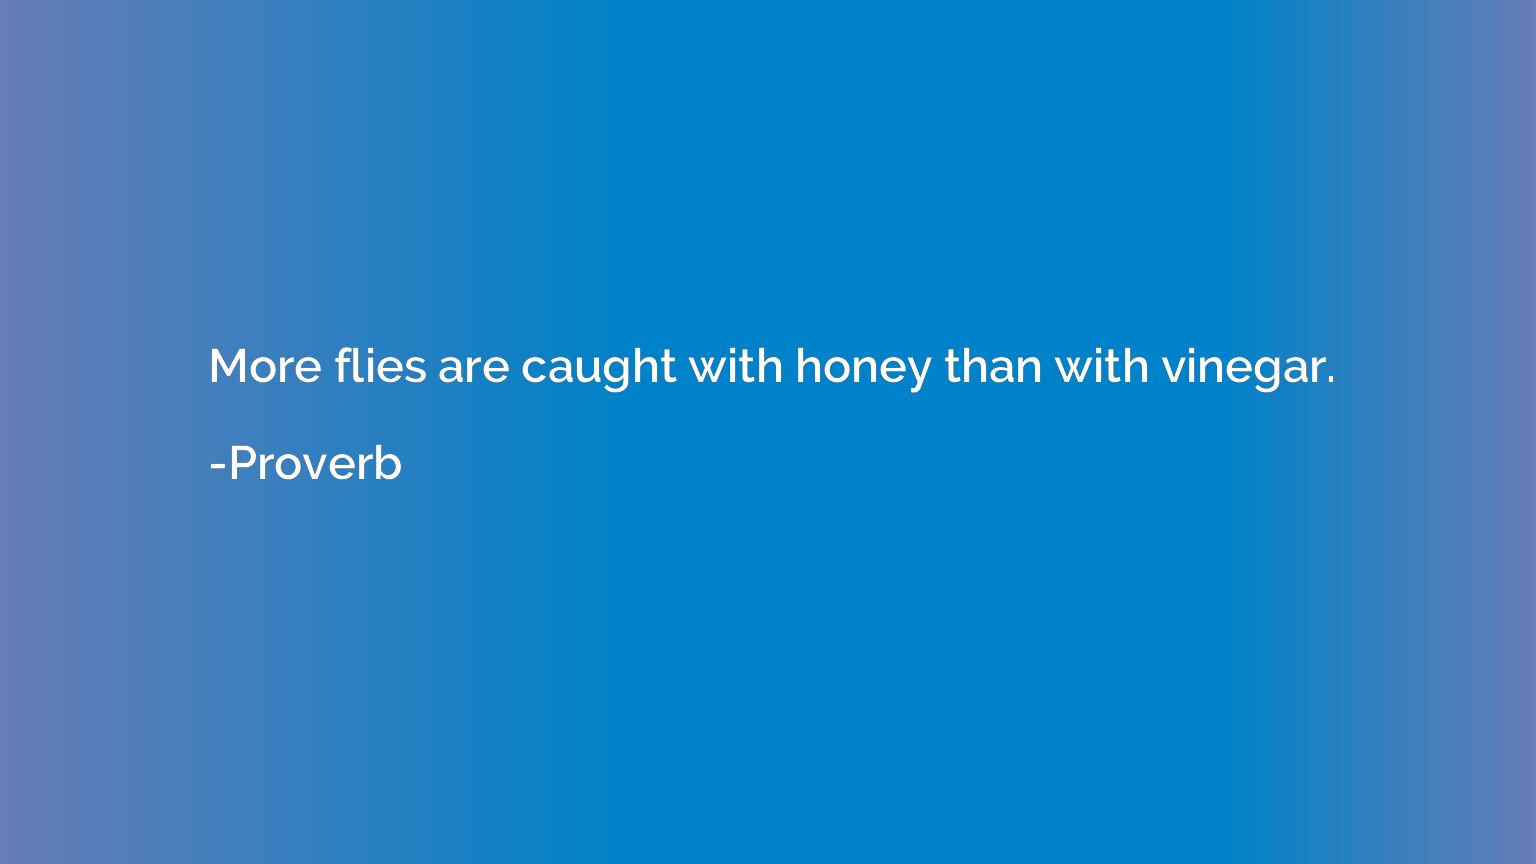 More flies are caught with honey than with vinegar.